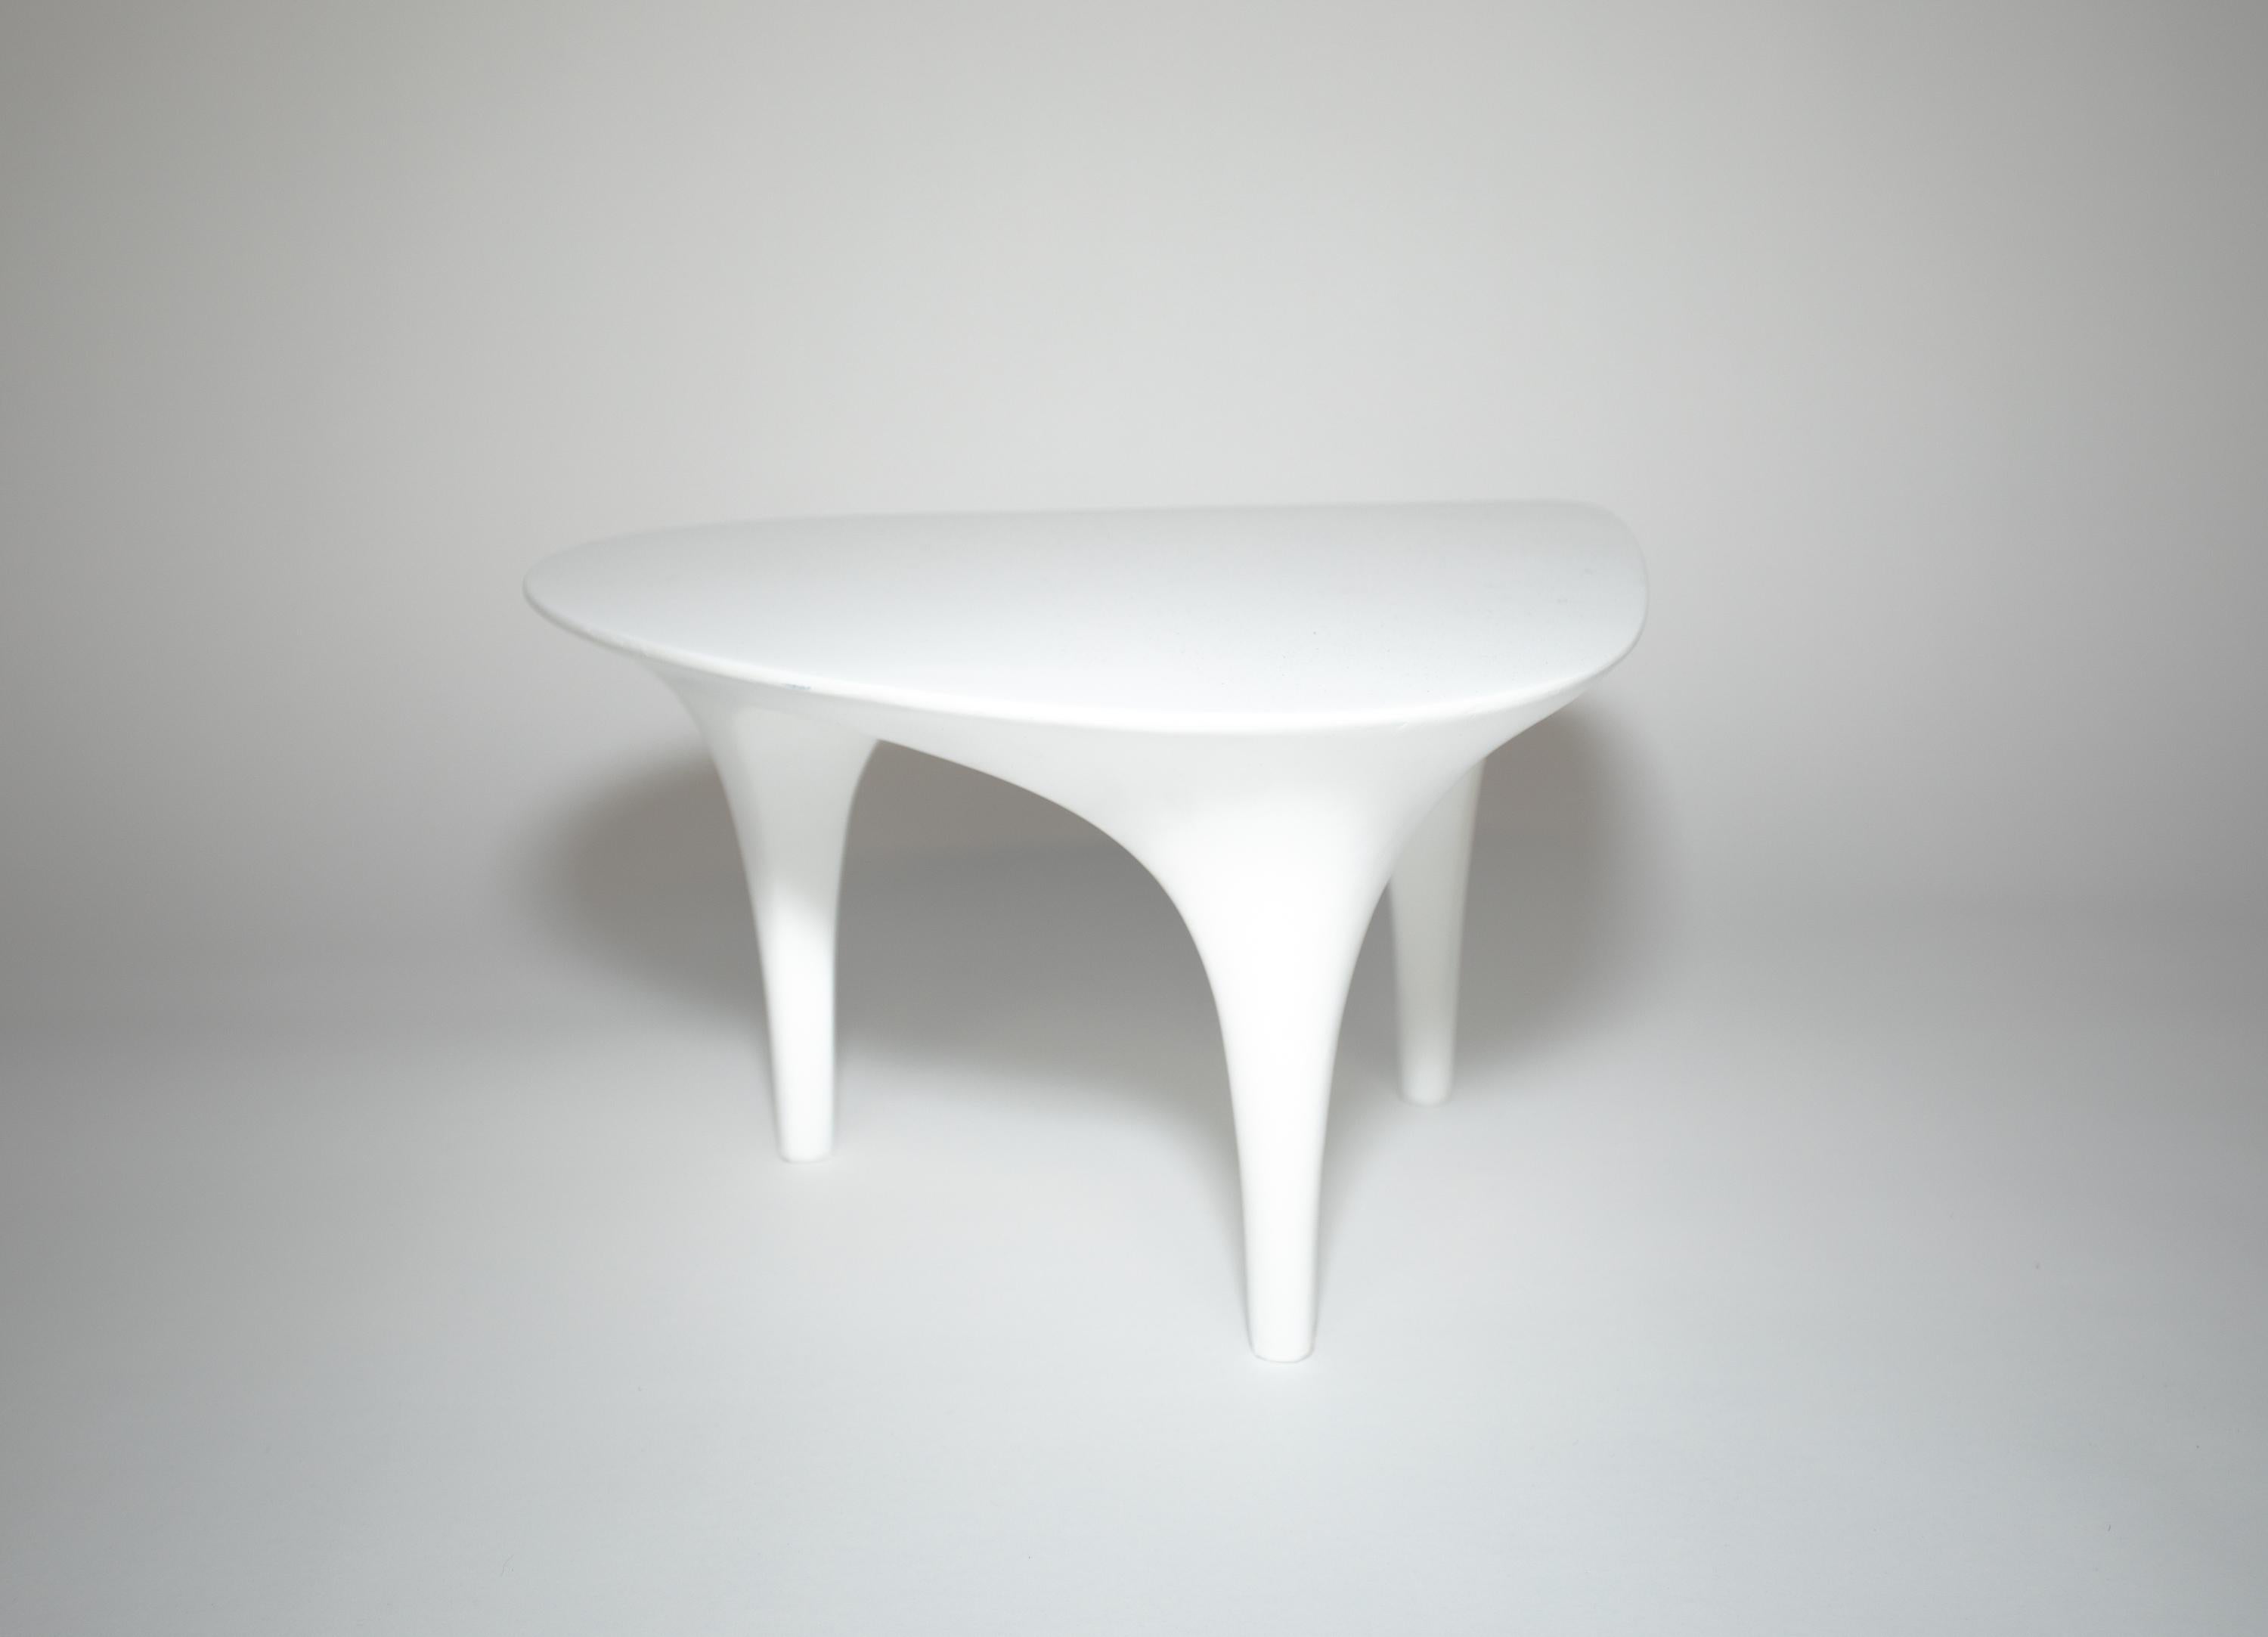 A small white lacquered table
Perfect for a plant or sculpture